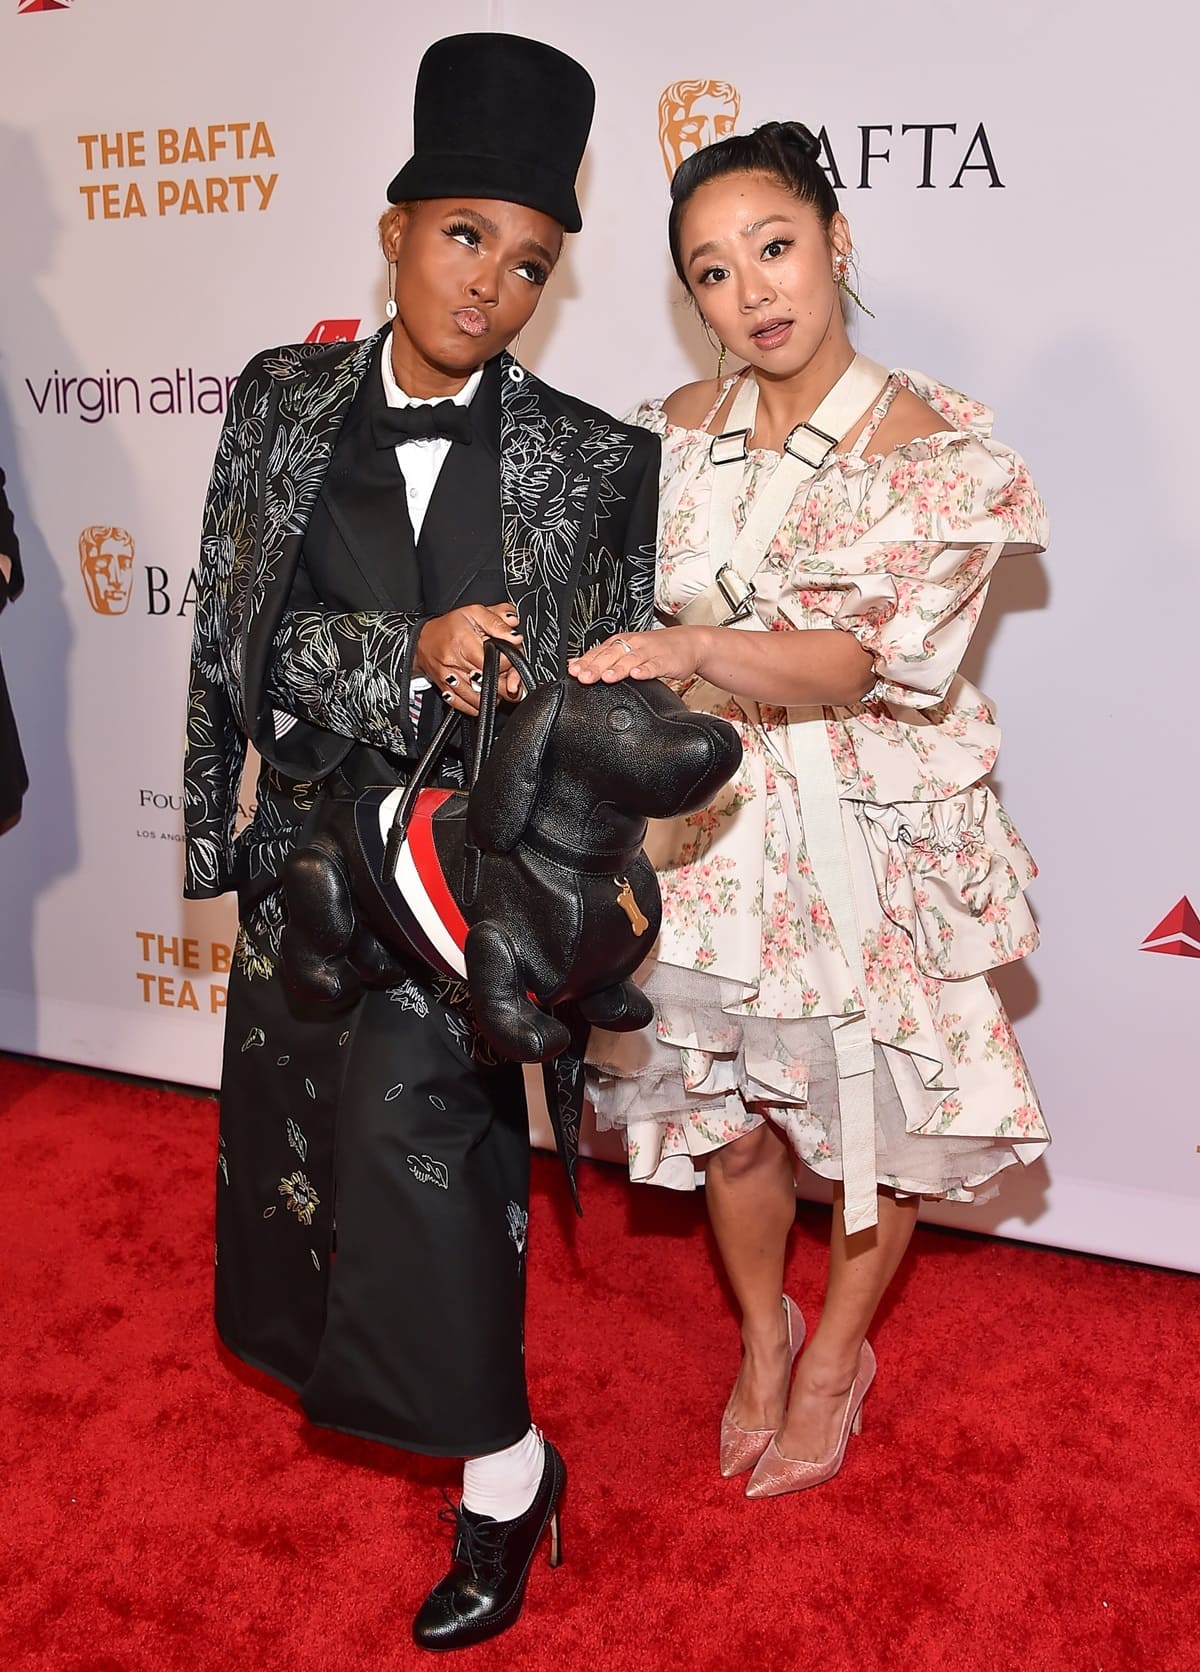 At the BAFTA Tea Party on January 14, 2023, in Los Angeles, Janelle Monáe, standing slightly taller at 5ft 0, was closely matched in height by Stephanie Hsu at 4ft 11 ¾, as they both graced the Four Seasons Hotel in Beverly Hills